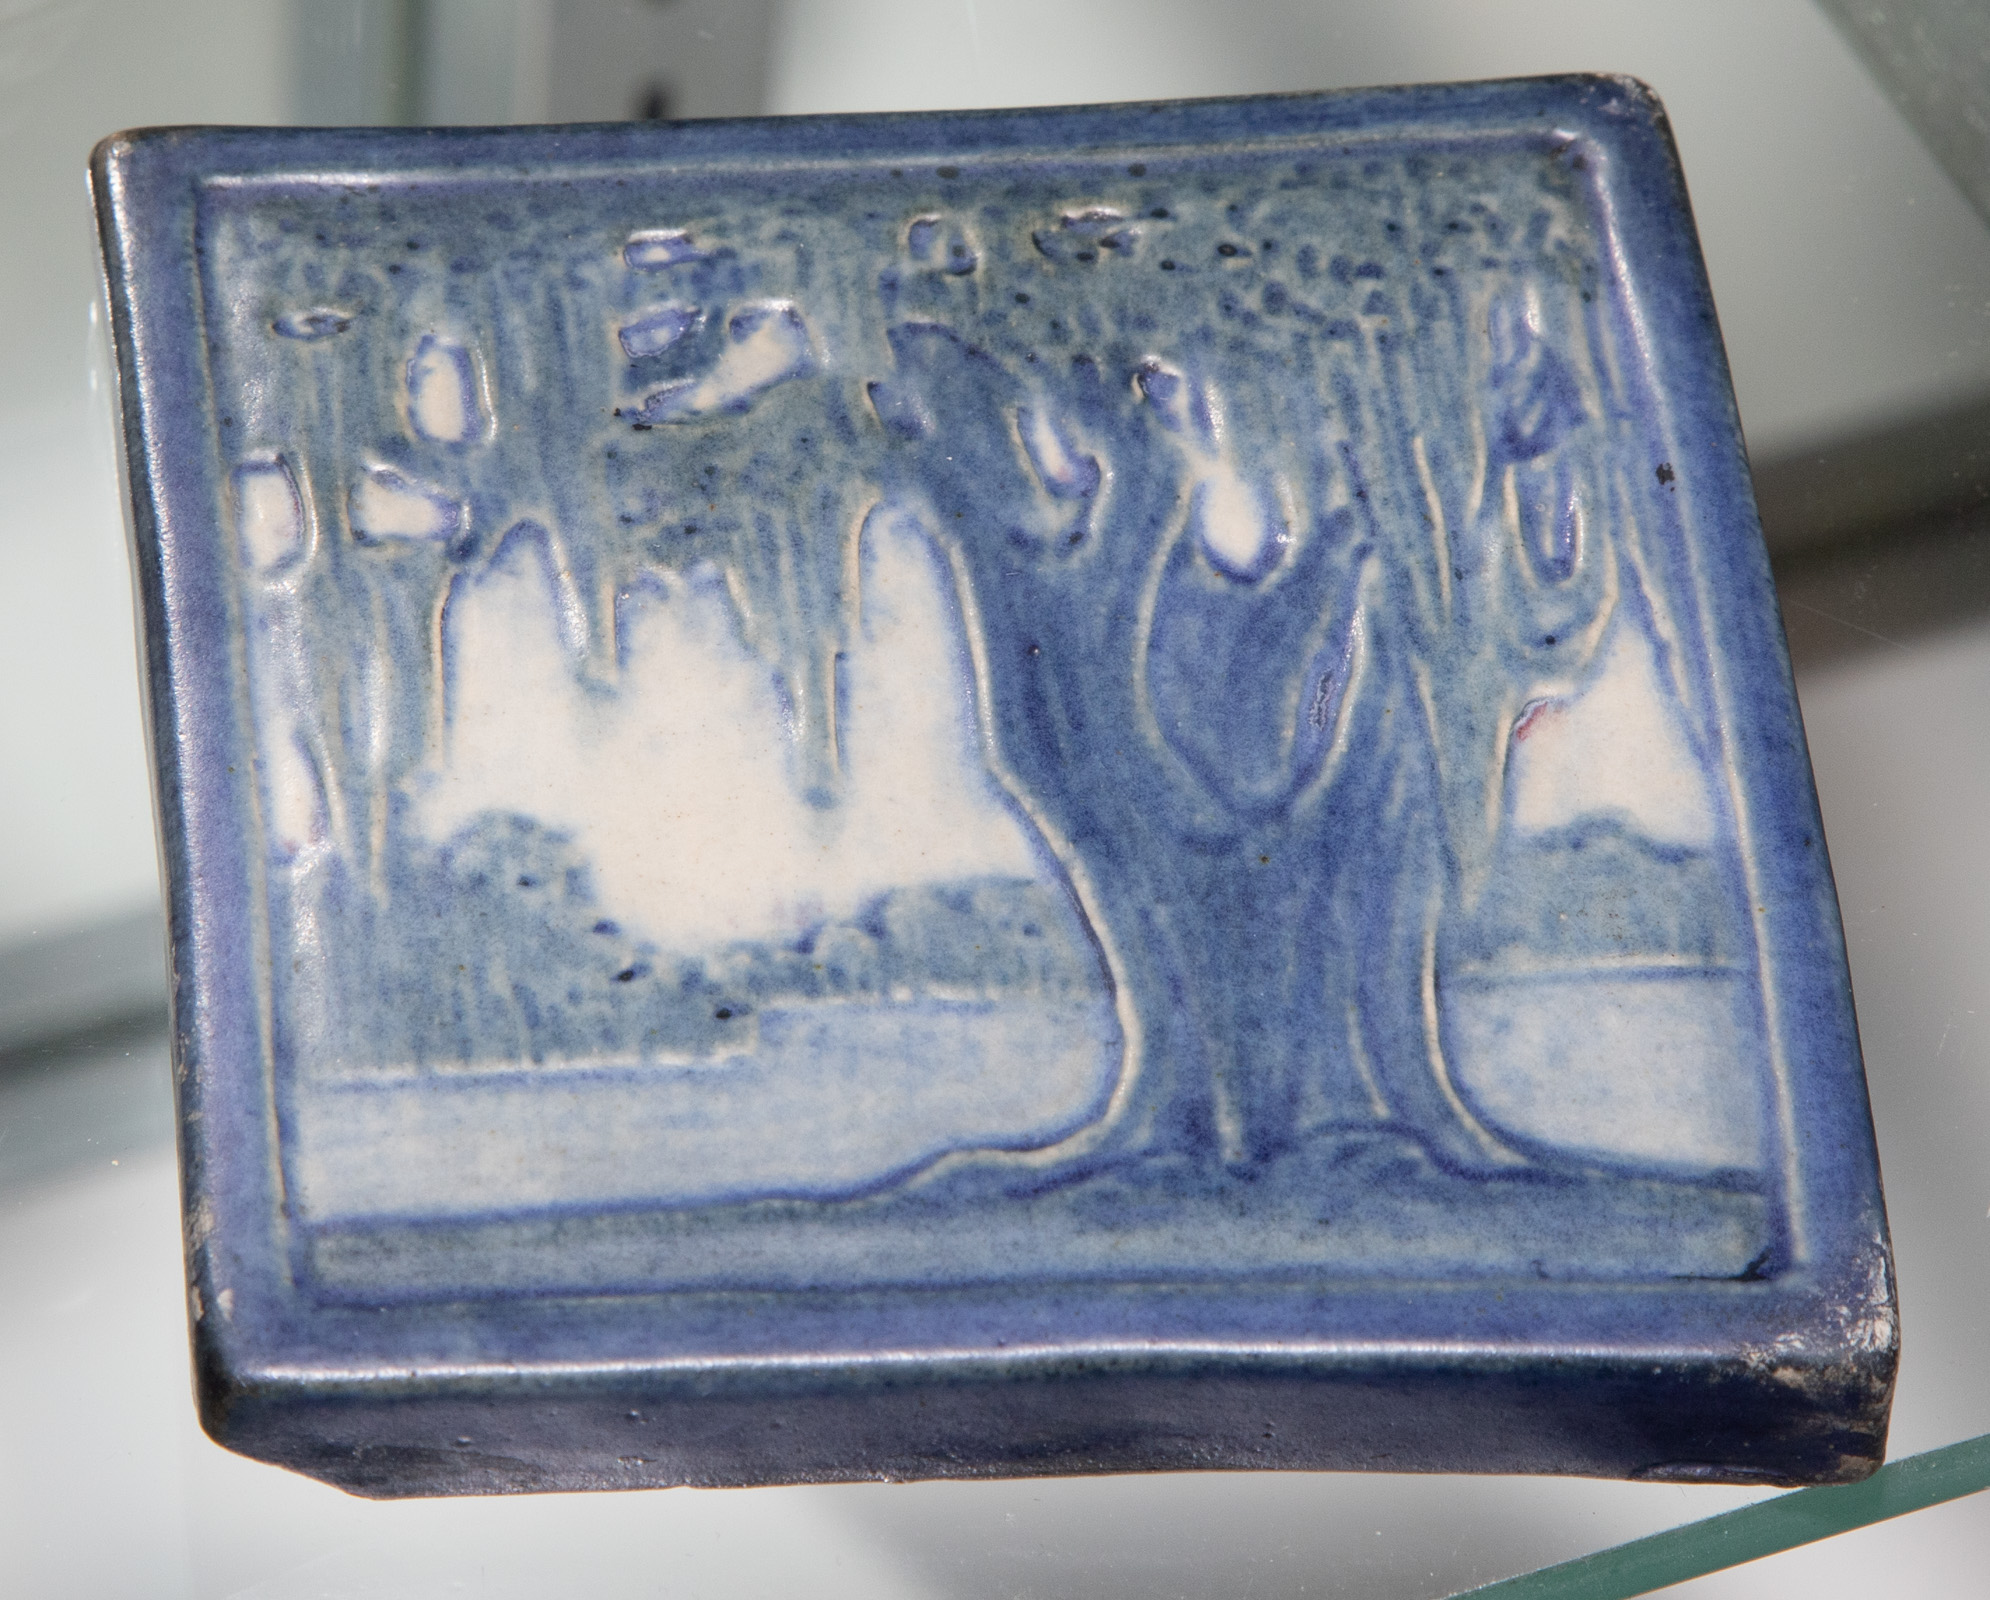 SMALL NEWCOMB COLLEGE POTTERY TILE